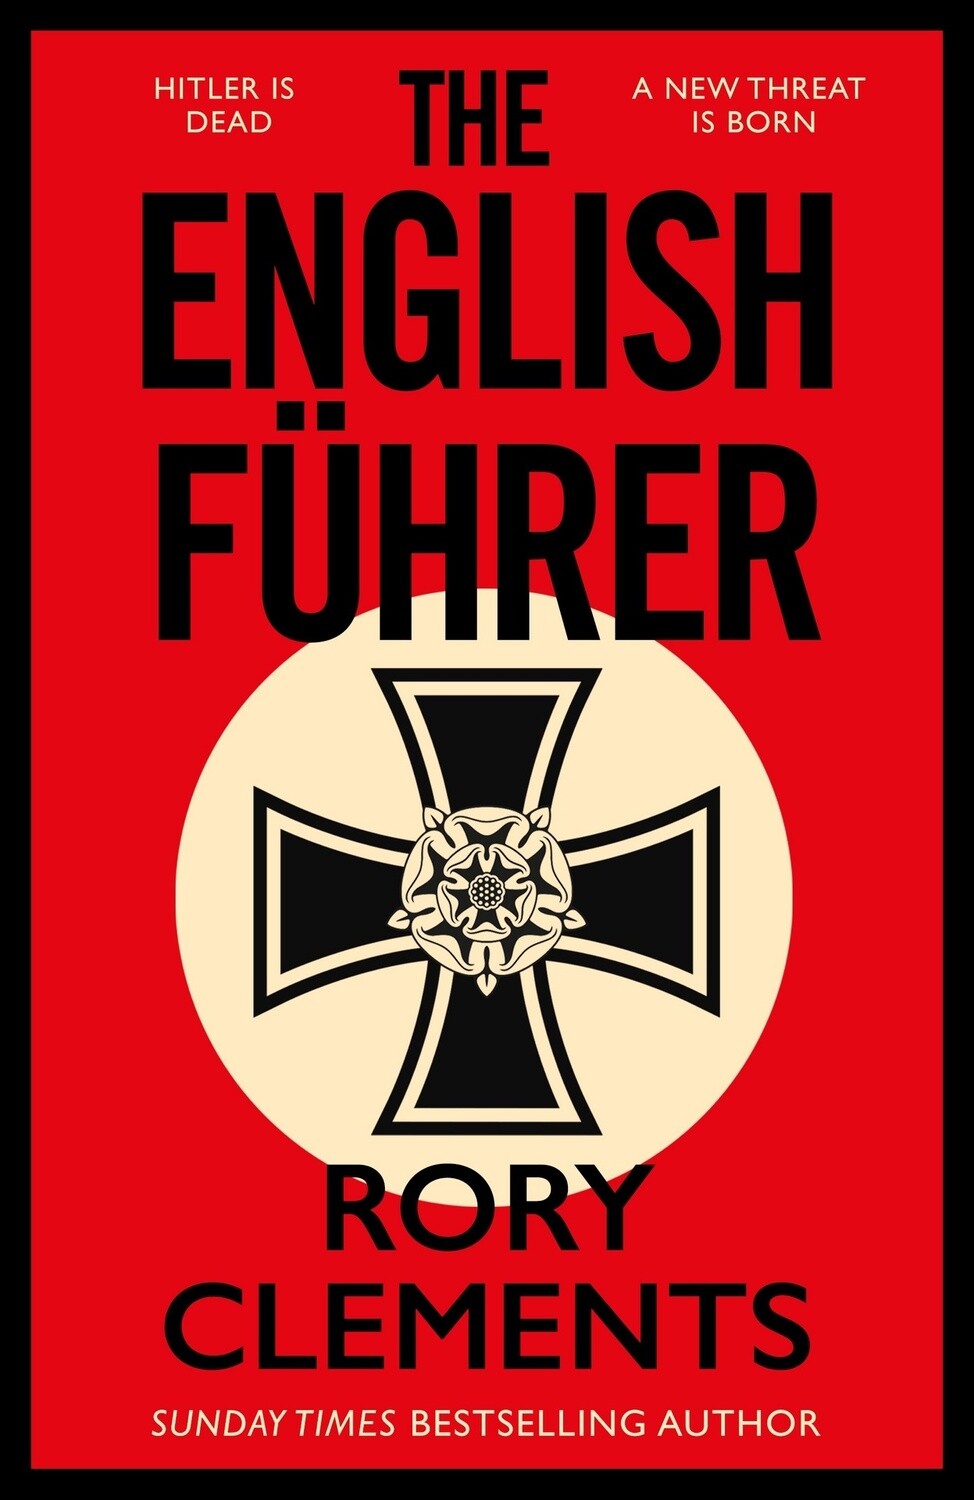 The English Fuhrer by Rory Clements